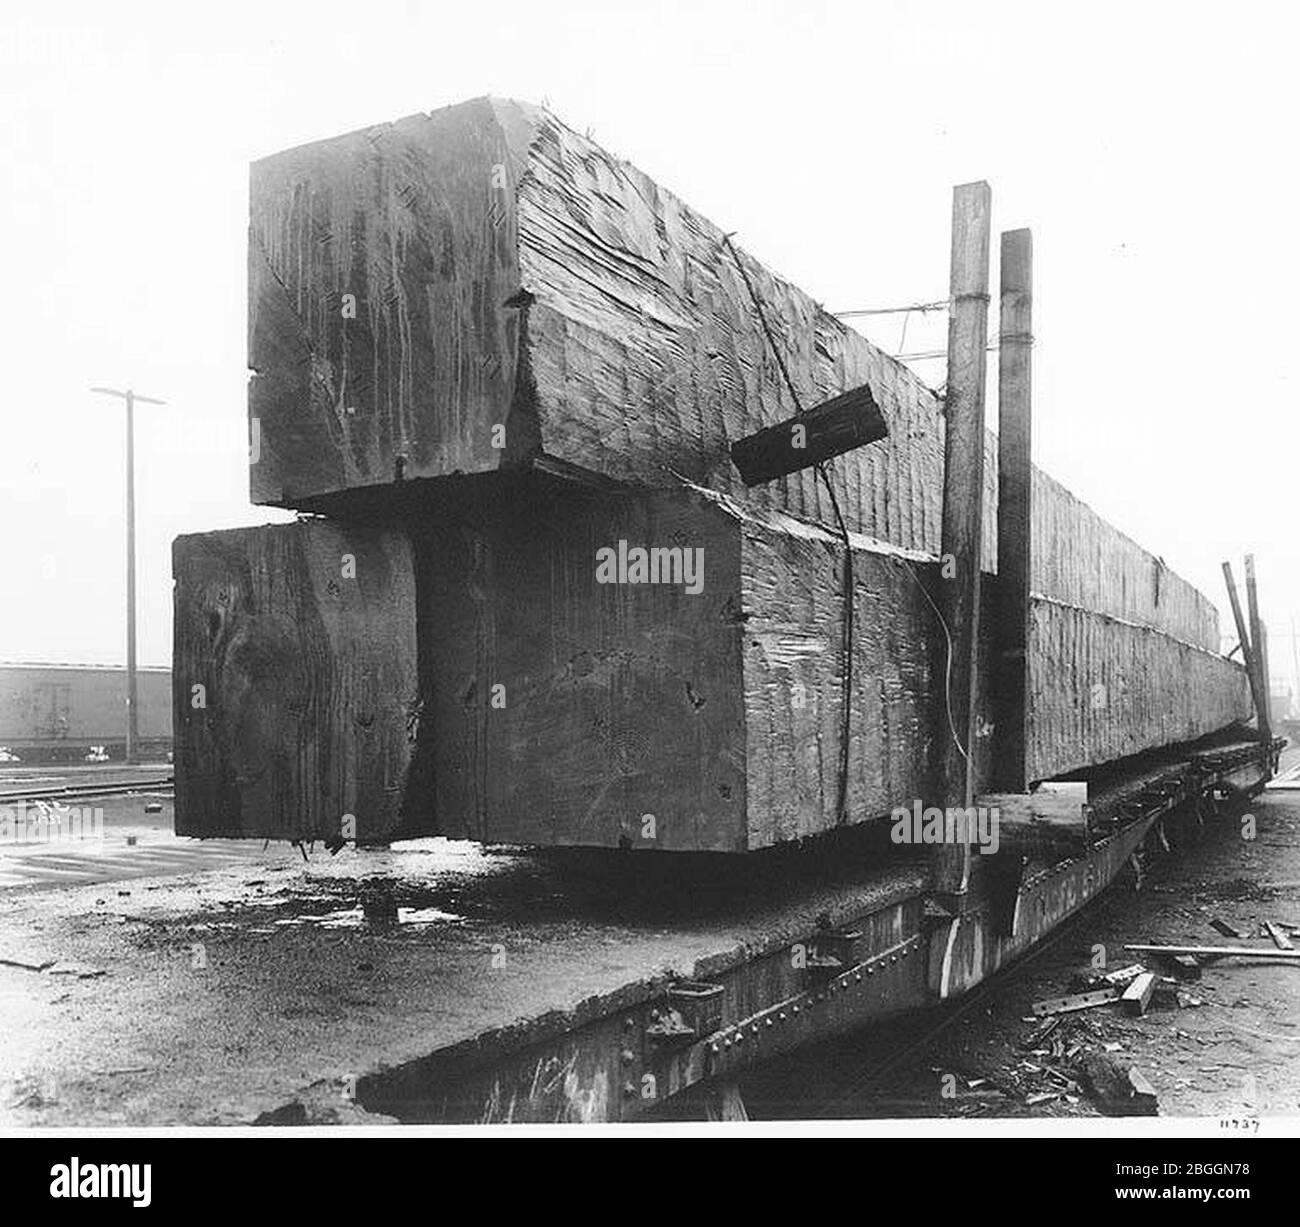 Hewn timbers by the H P Lewis Co on railroad flatcar (CURTIS 301). Stock Photo